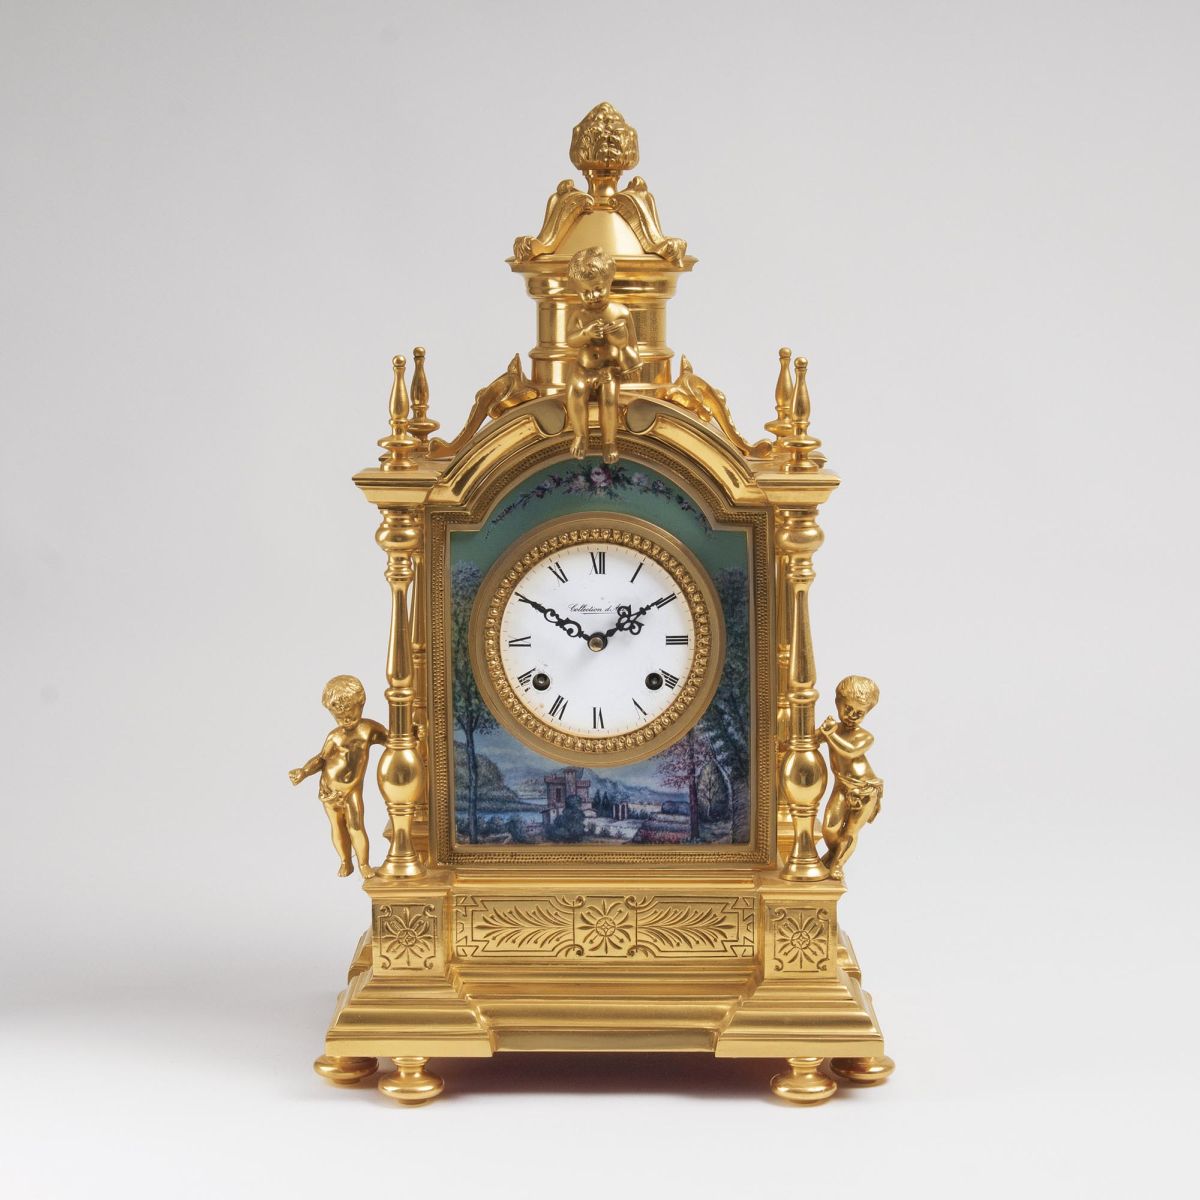 A Mantle Clock with Putti